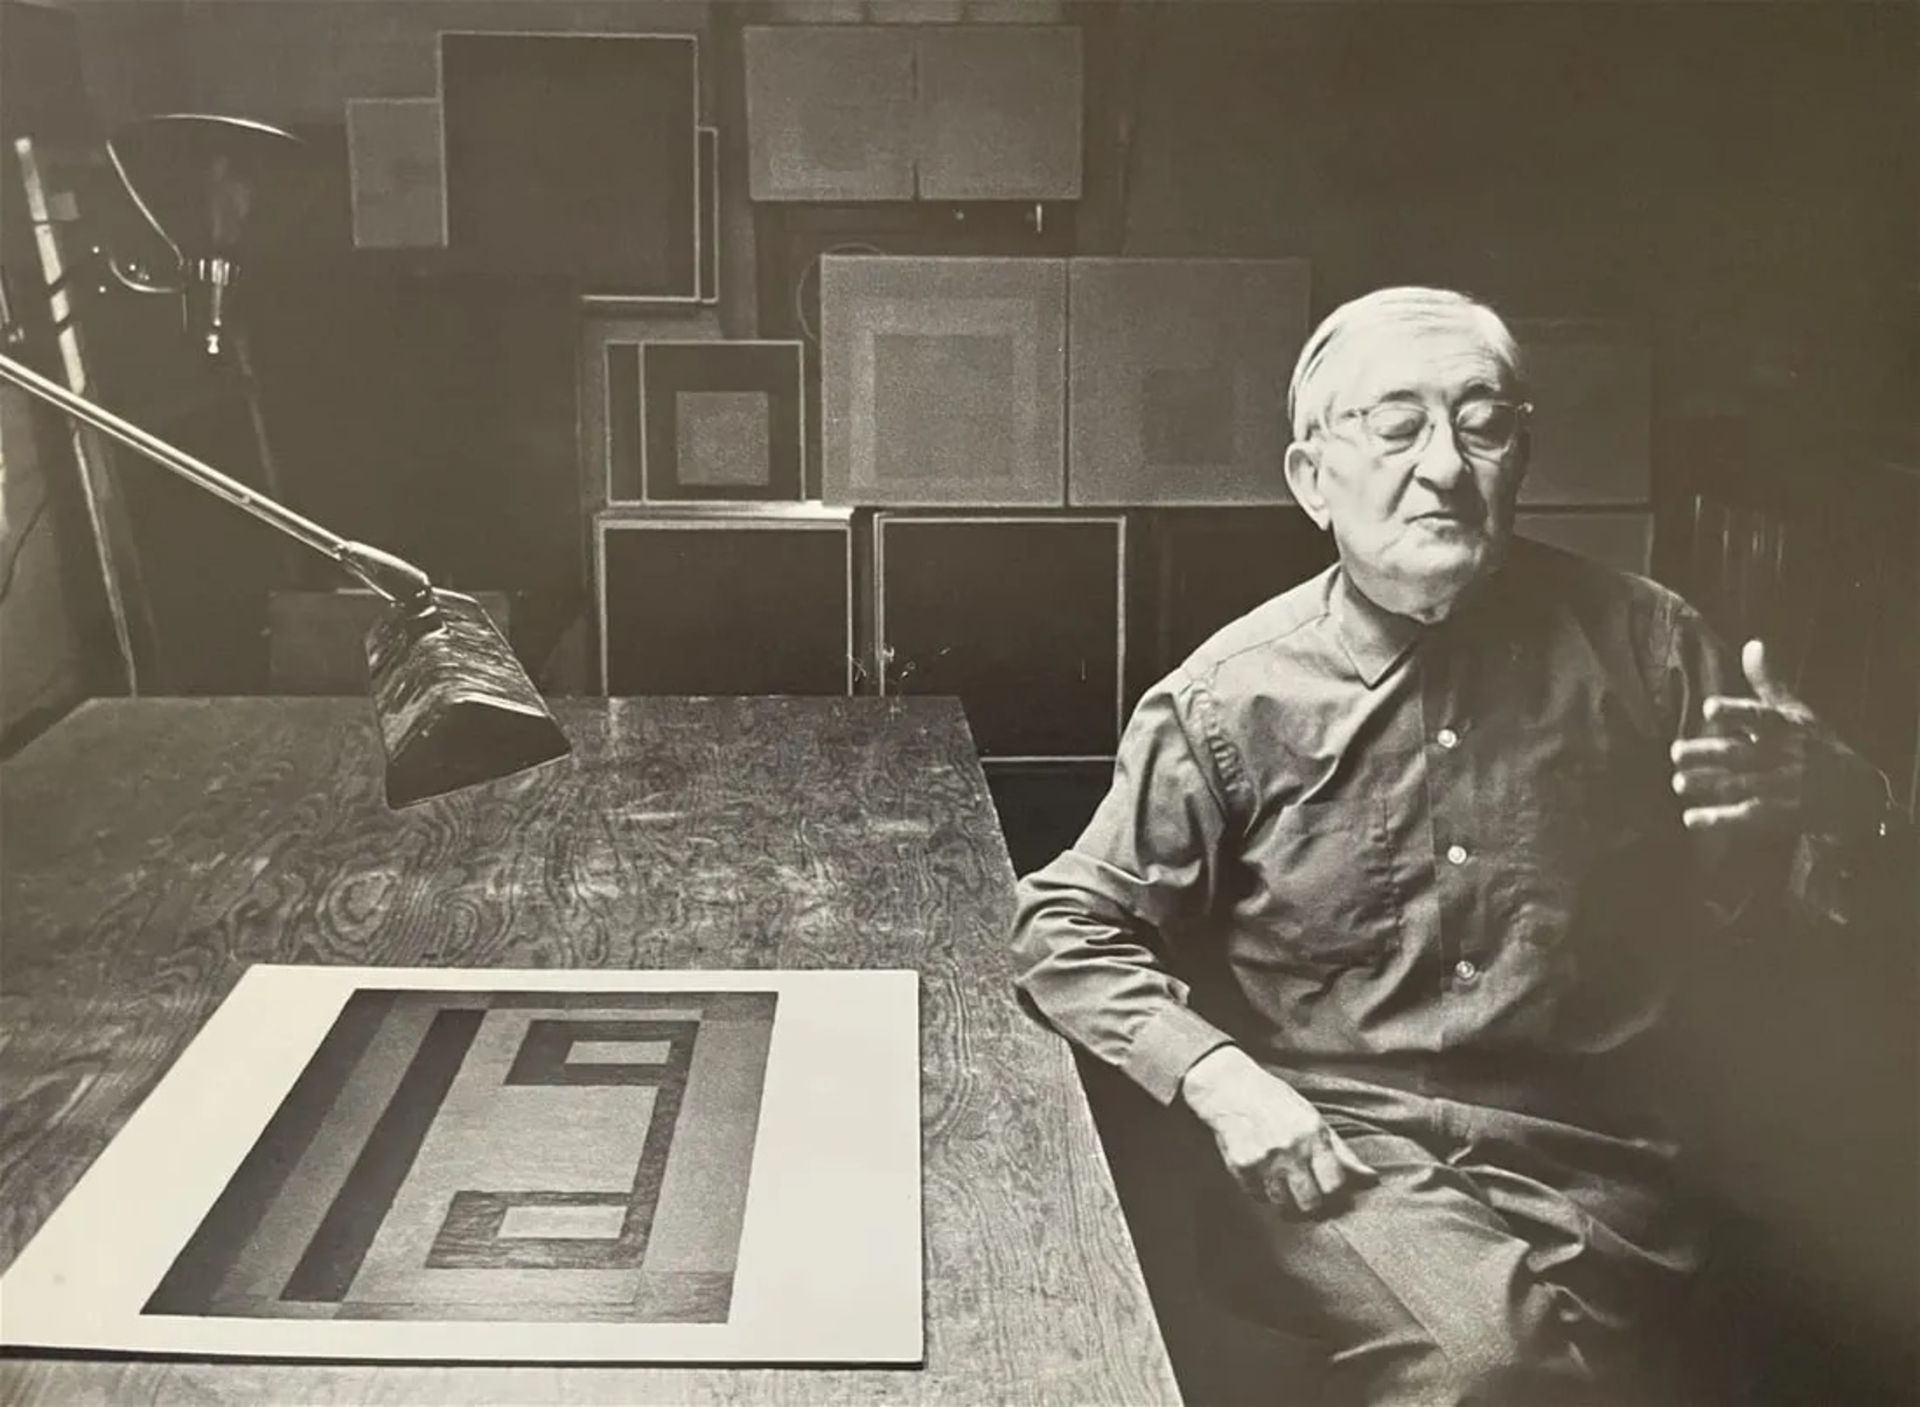 Hans Namuth "Josef Albers, New Haven, Connecticut, 1965" Print